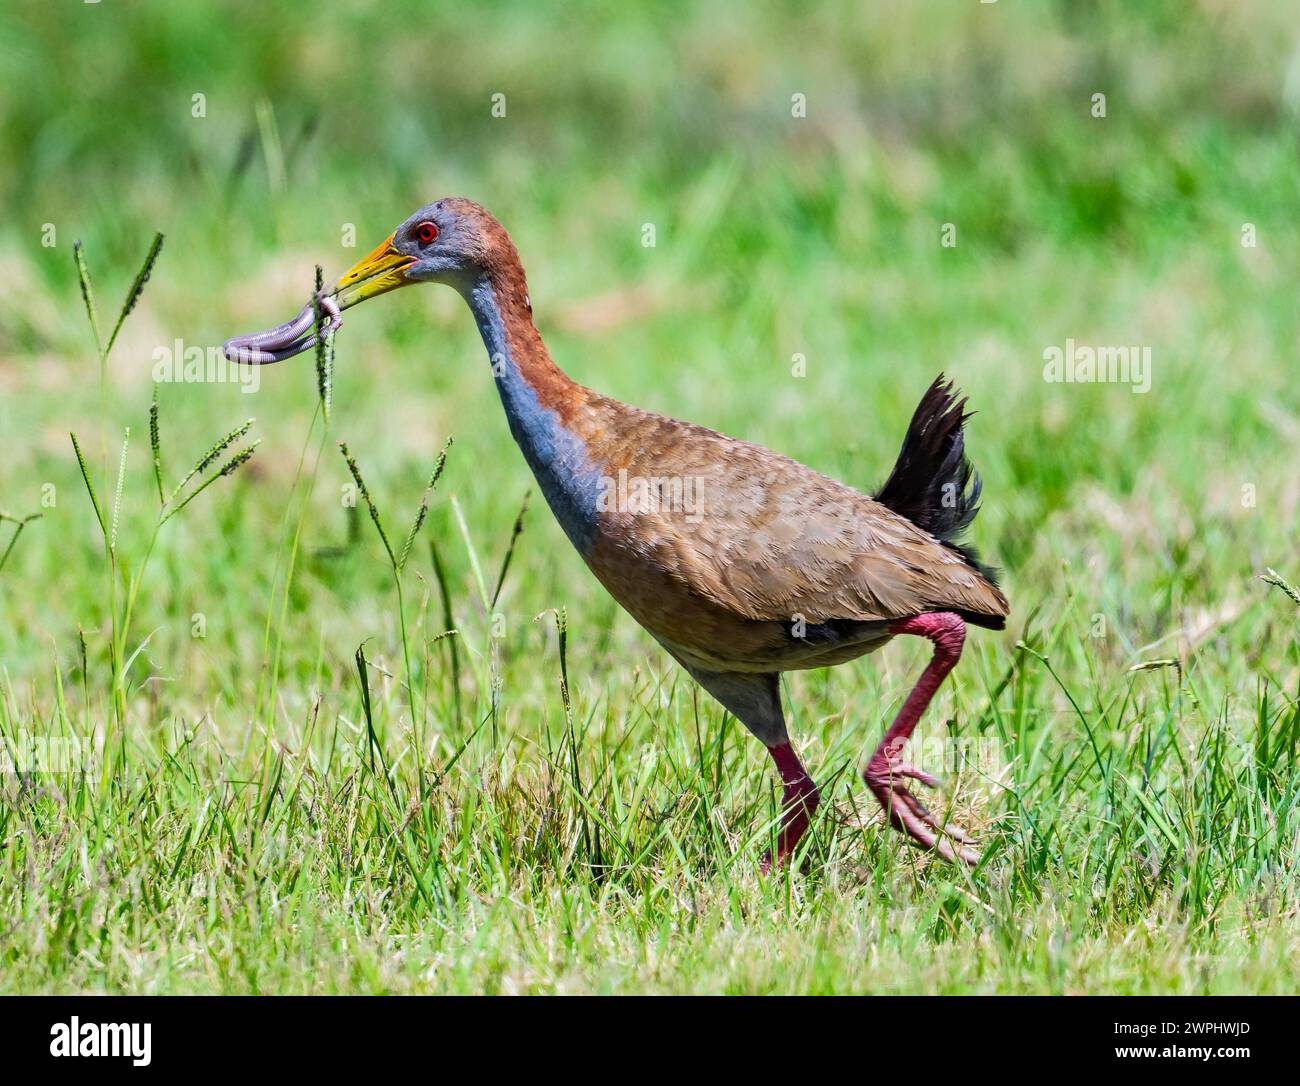 A Giant Wood-Rail (Aramides ypecaha) with a catch of giant earthworm. Uruguay. Stock Photo